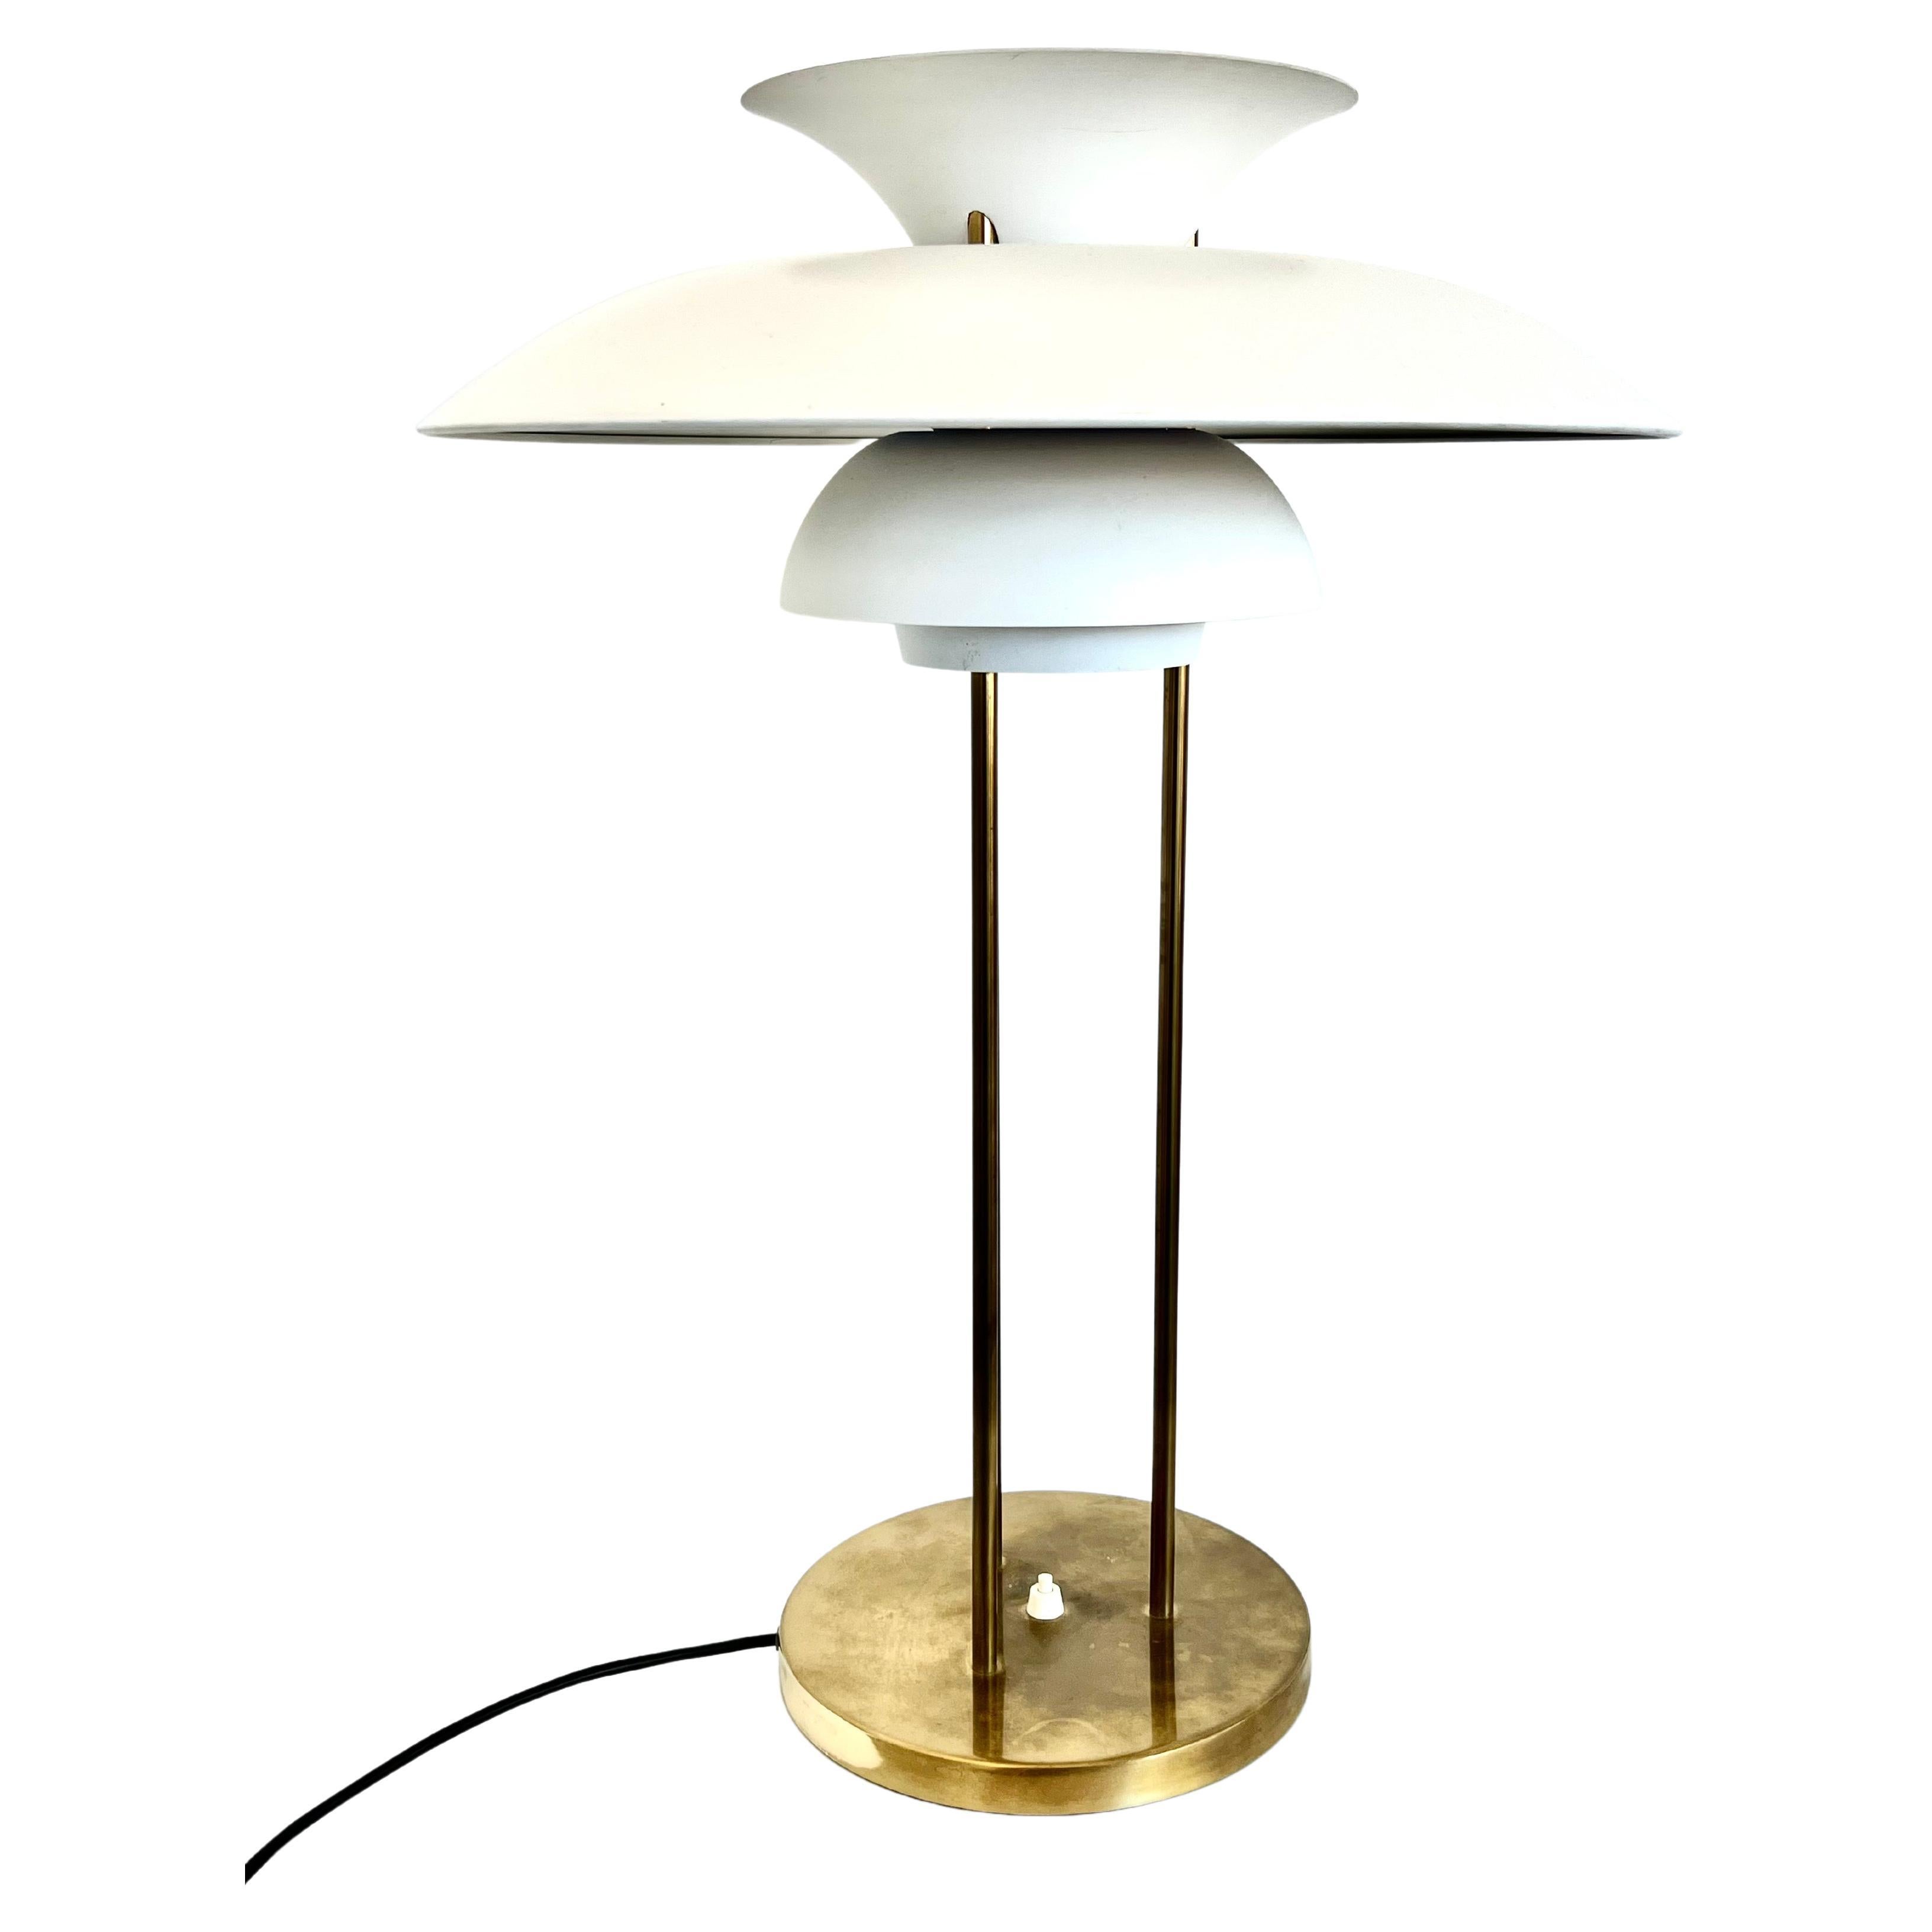 Vintage Poul Henningsen PH5 table lamp in brass and painted metal.